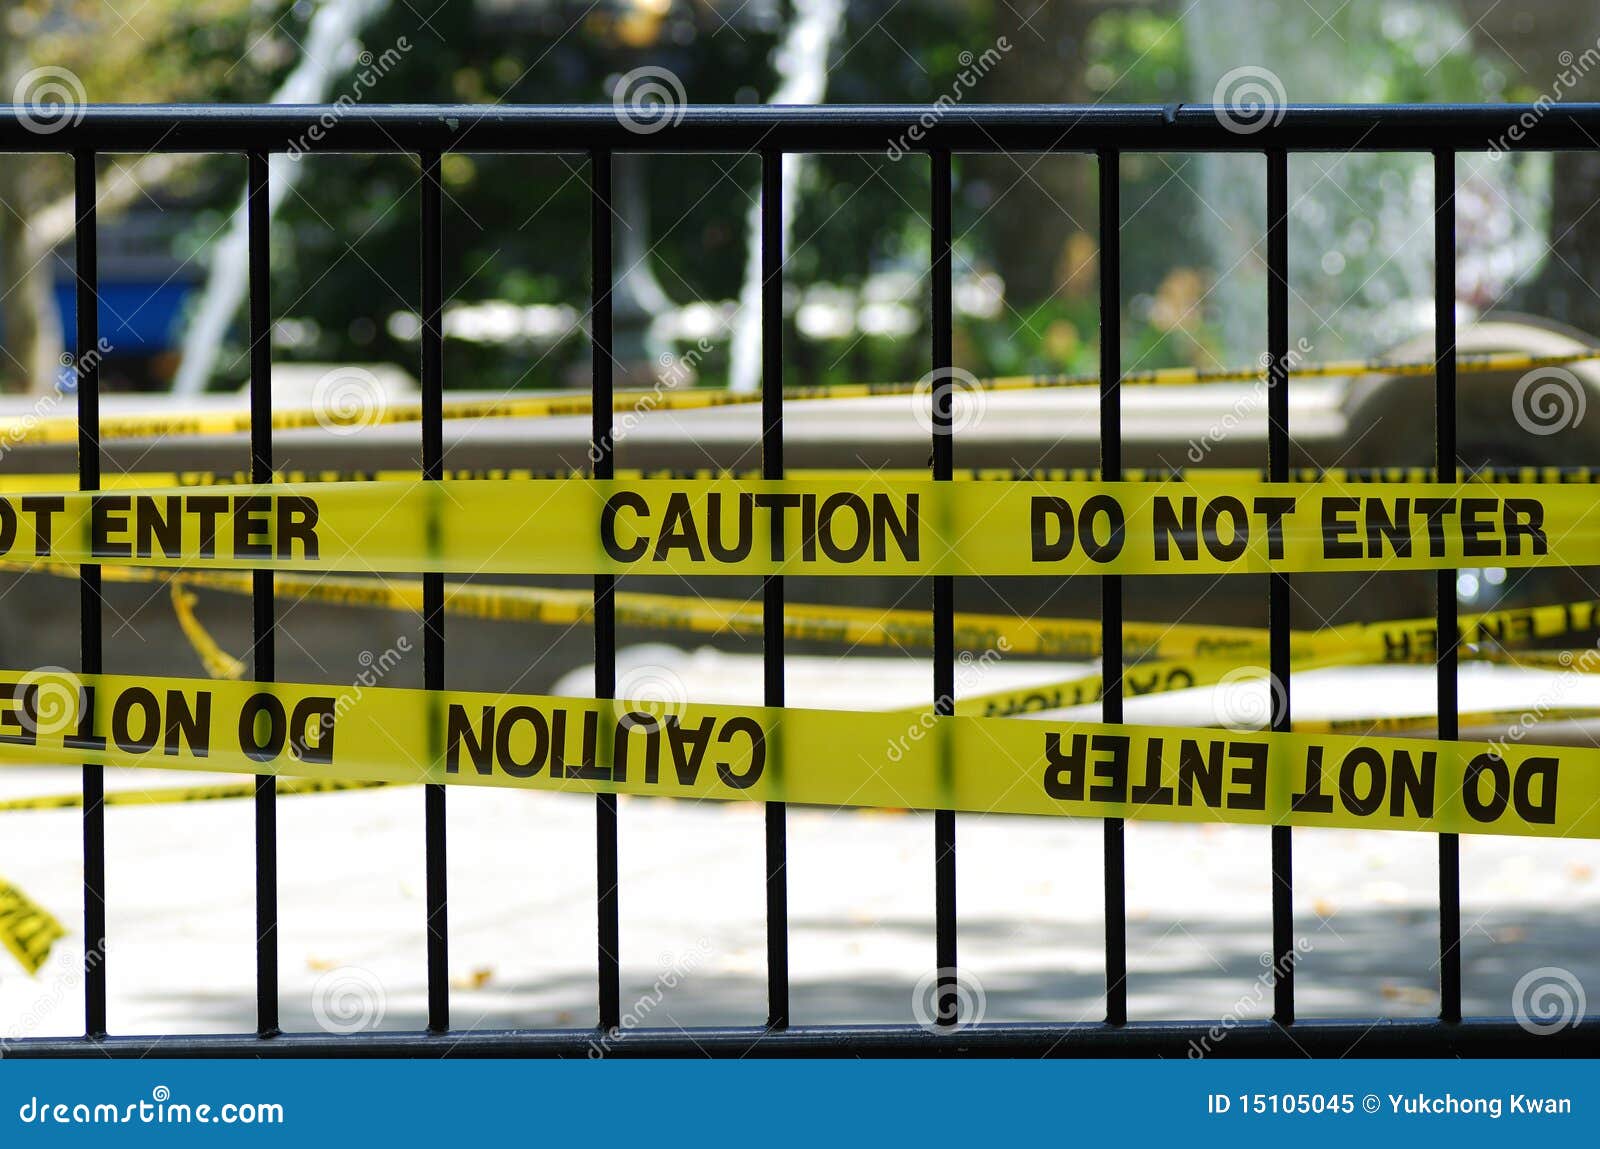 the caution and do not enter sign